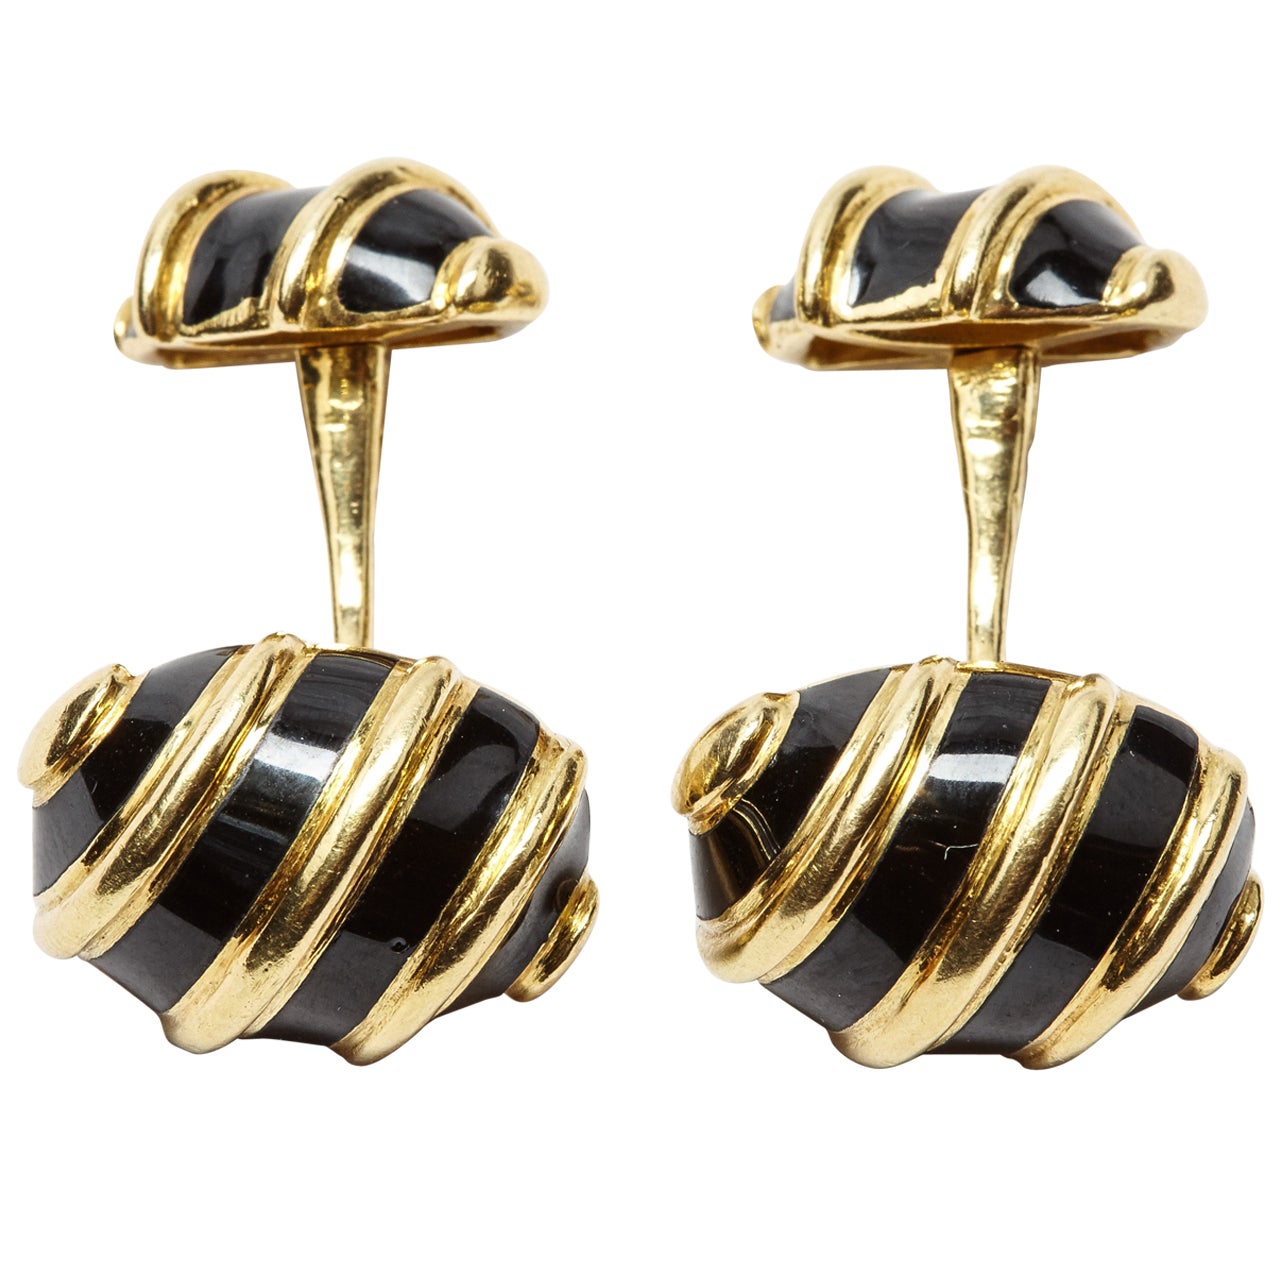 A pair of enamel cufflinks by Jean Schlumberger for Tiffany & Co. For Sale